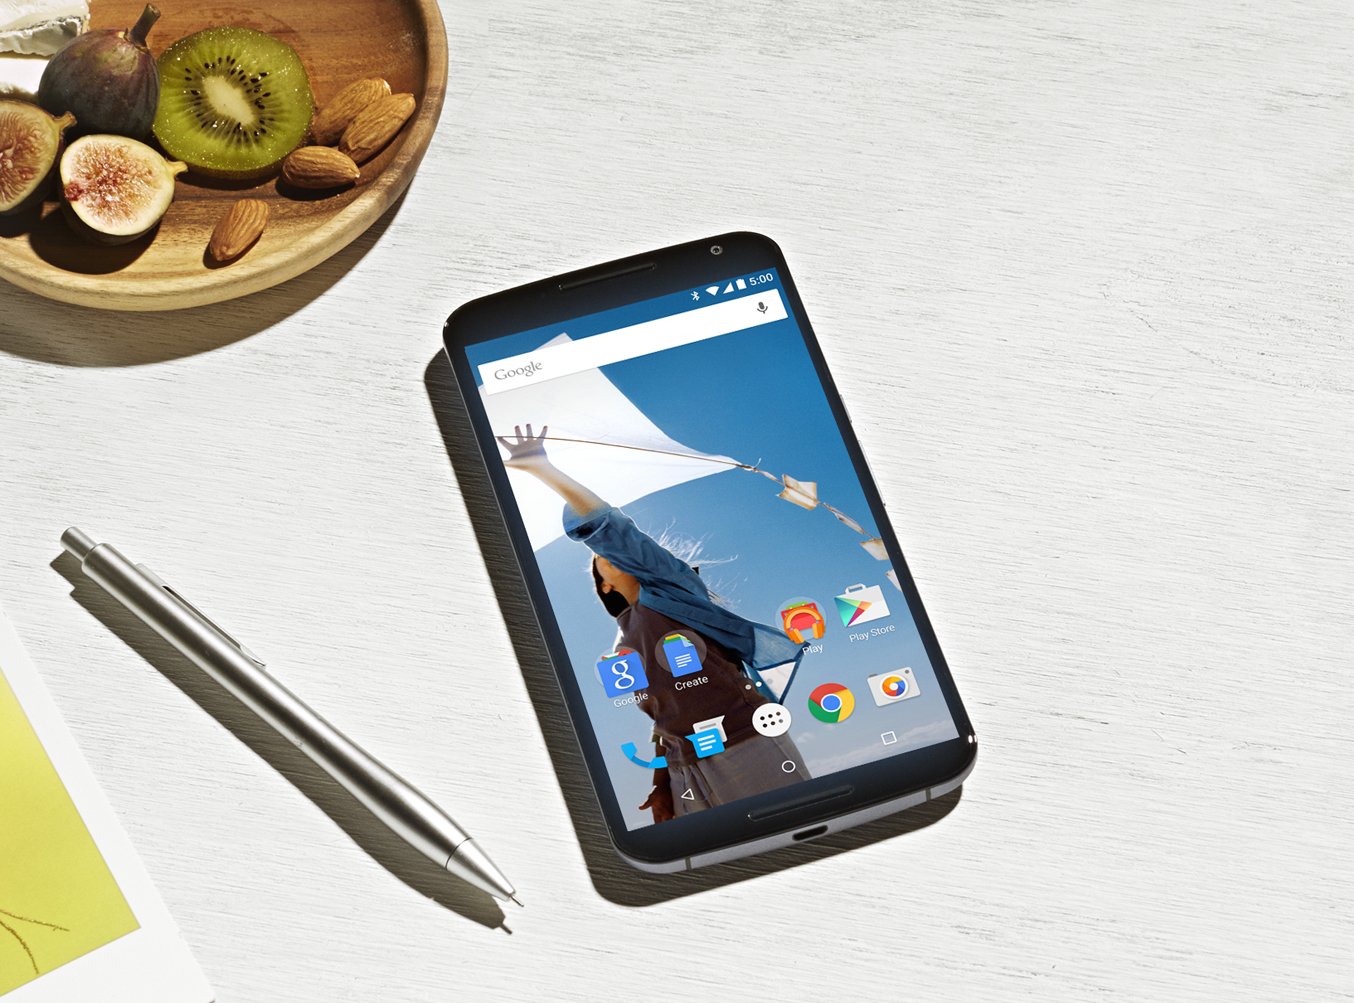 More Android than Android: Google launches Nexus 6 as Android’s poster child